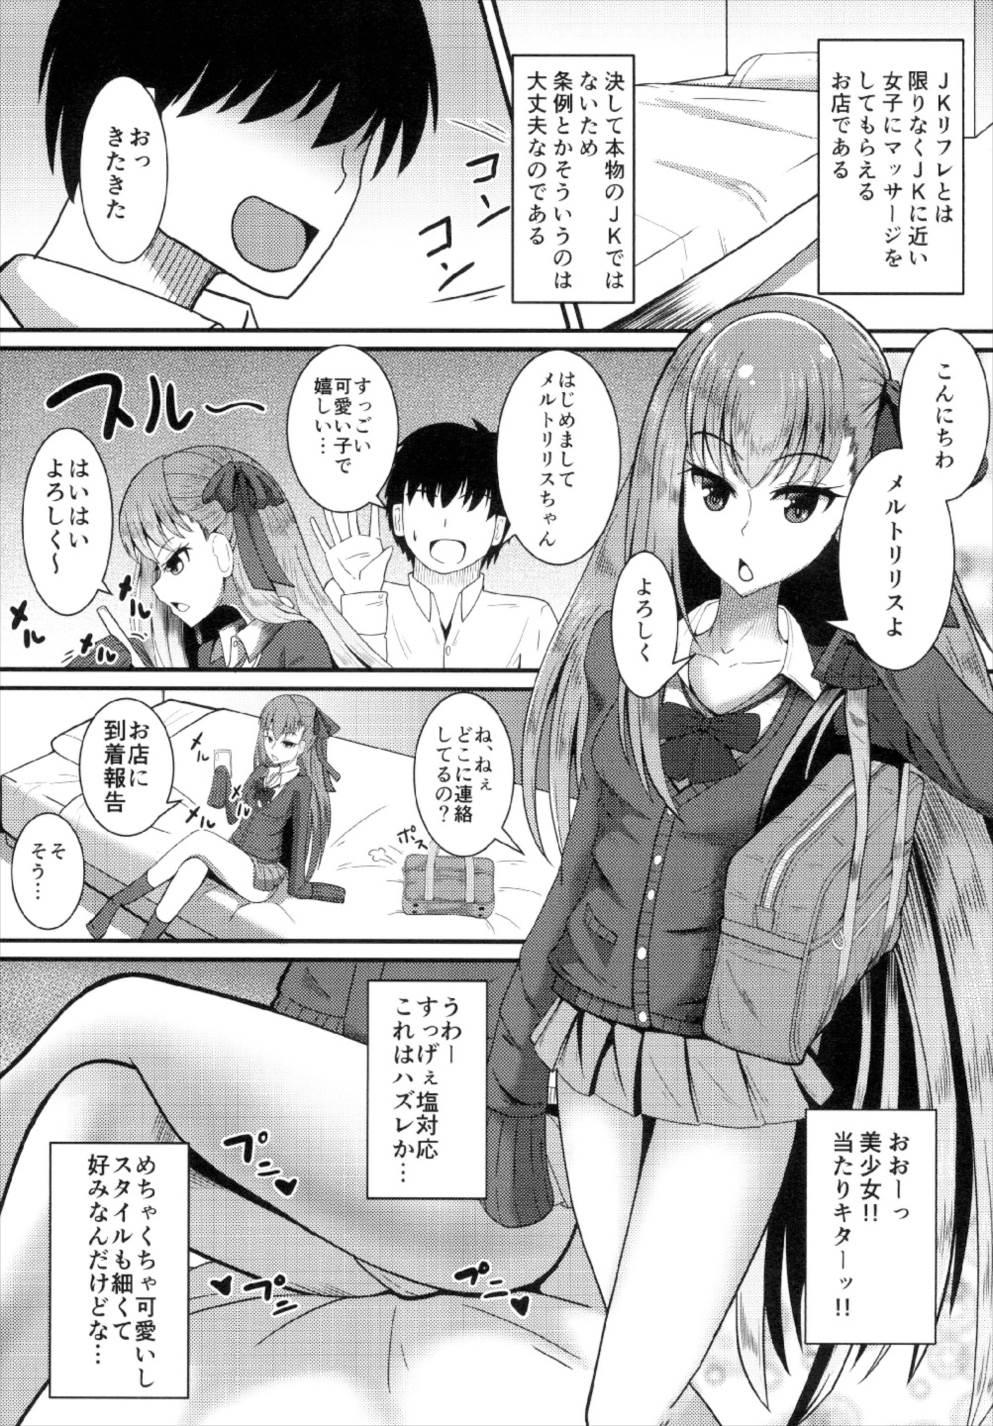 Phat Ass Chaldea JK Collection Vol. 2 Meltlilith - Fate grand order American - Page 3